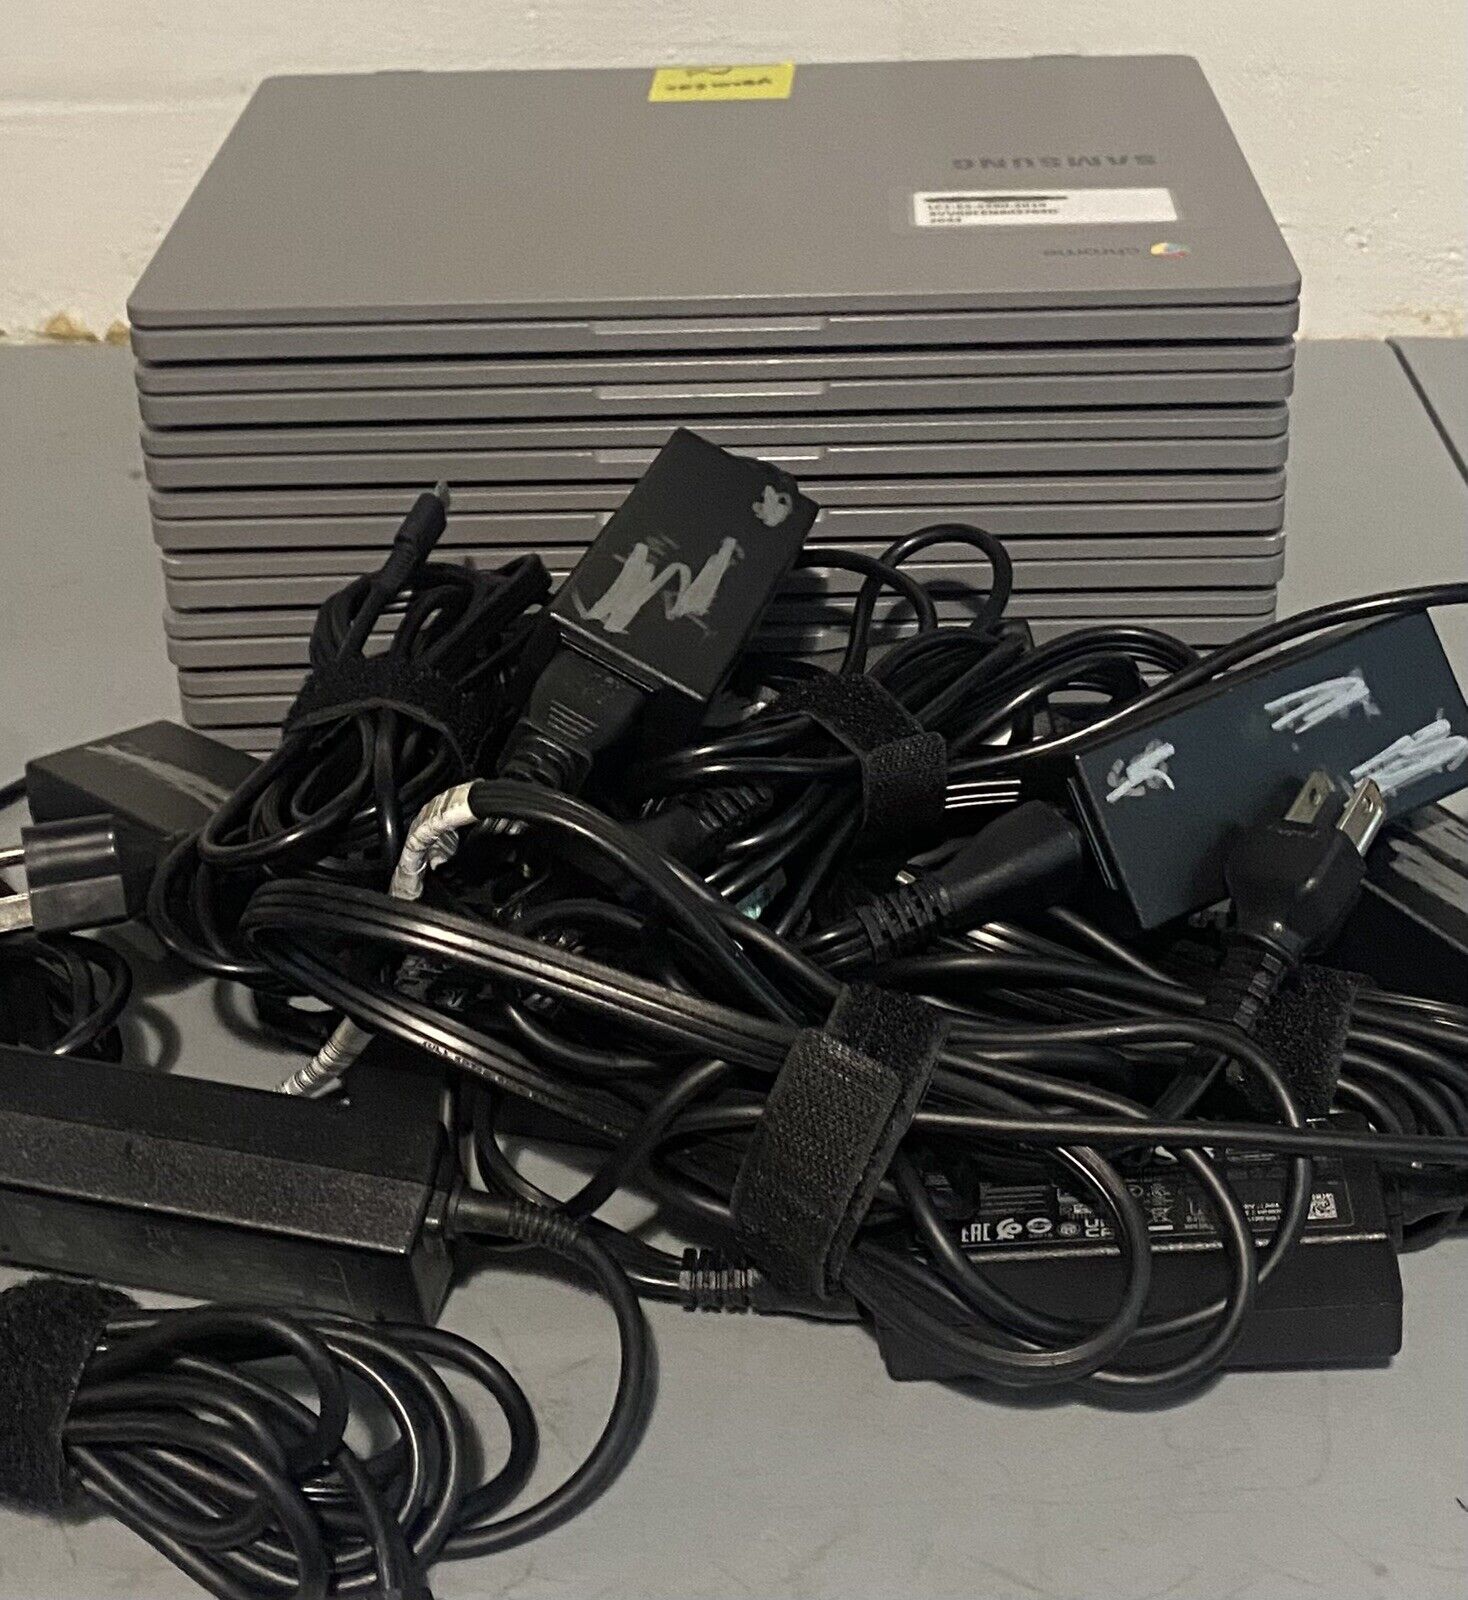 Lot Of (8) Samsung XE310XBA 11” Chrome Books - w/(8) 45w Chargers - READ